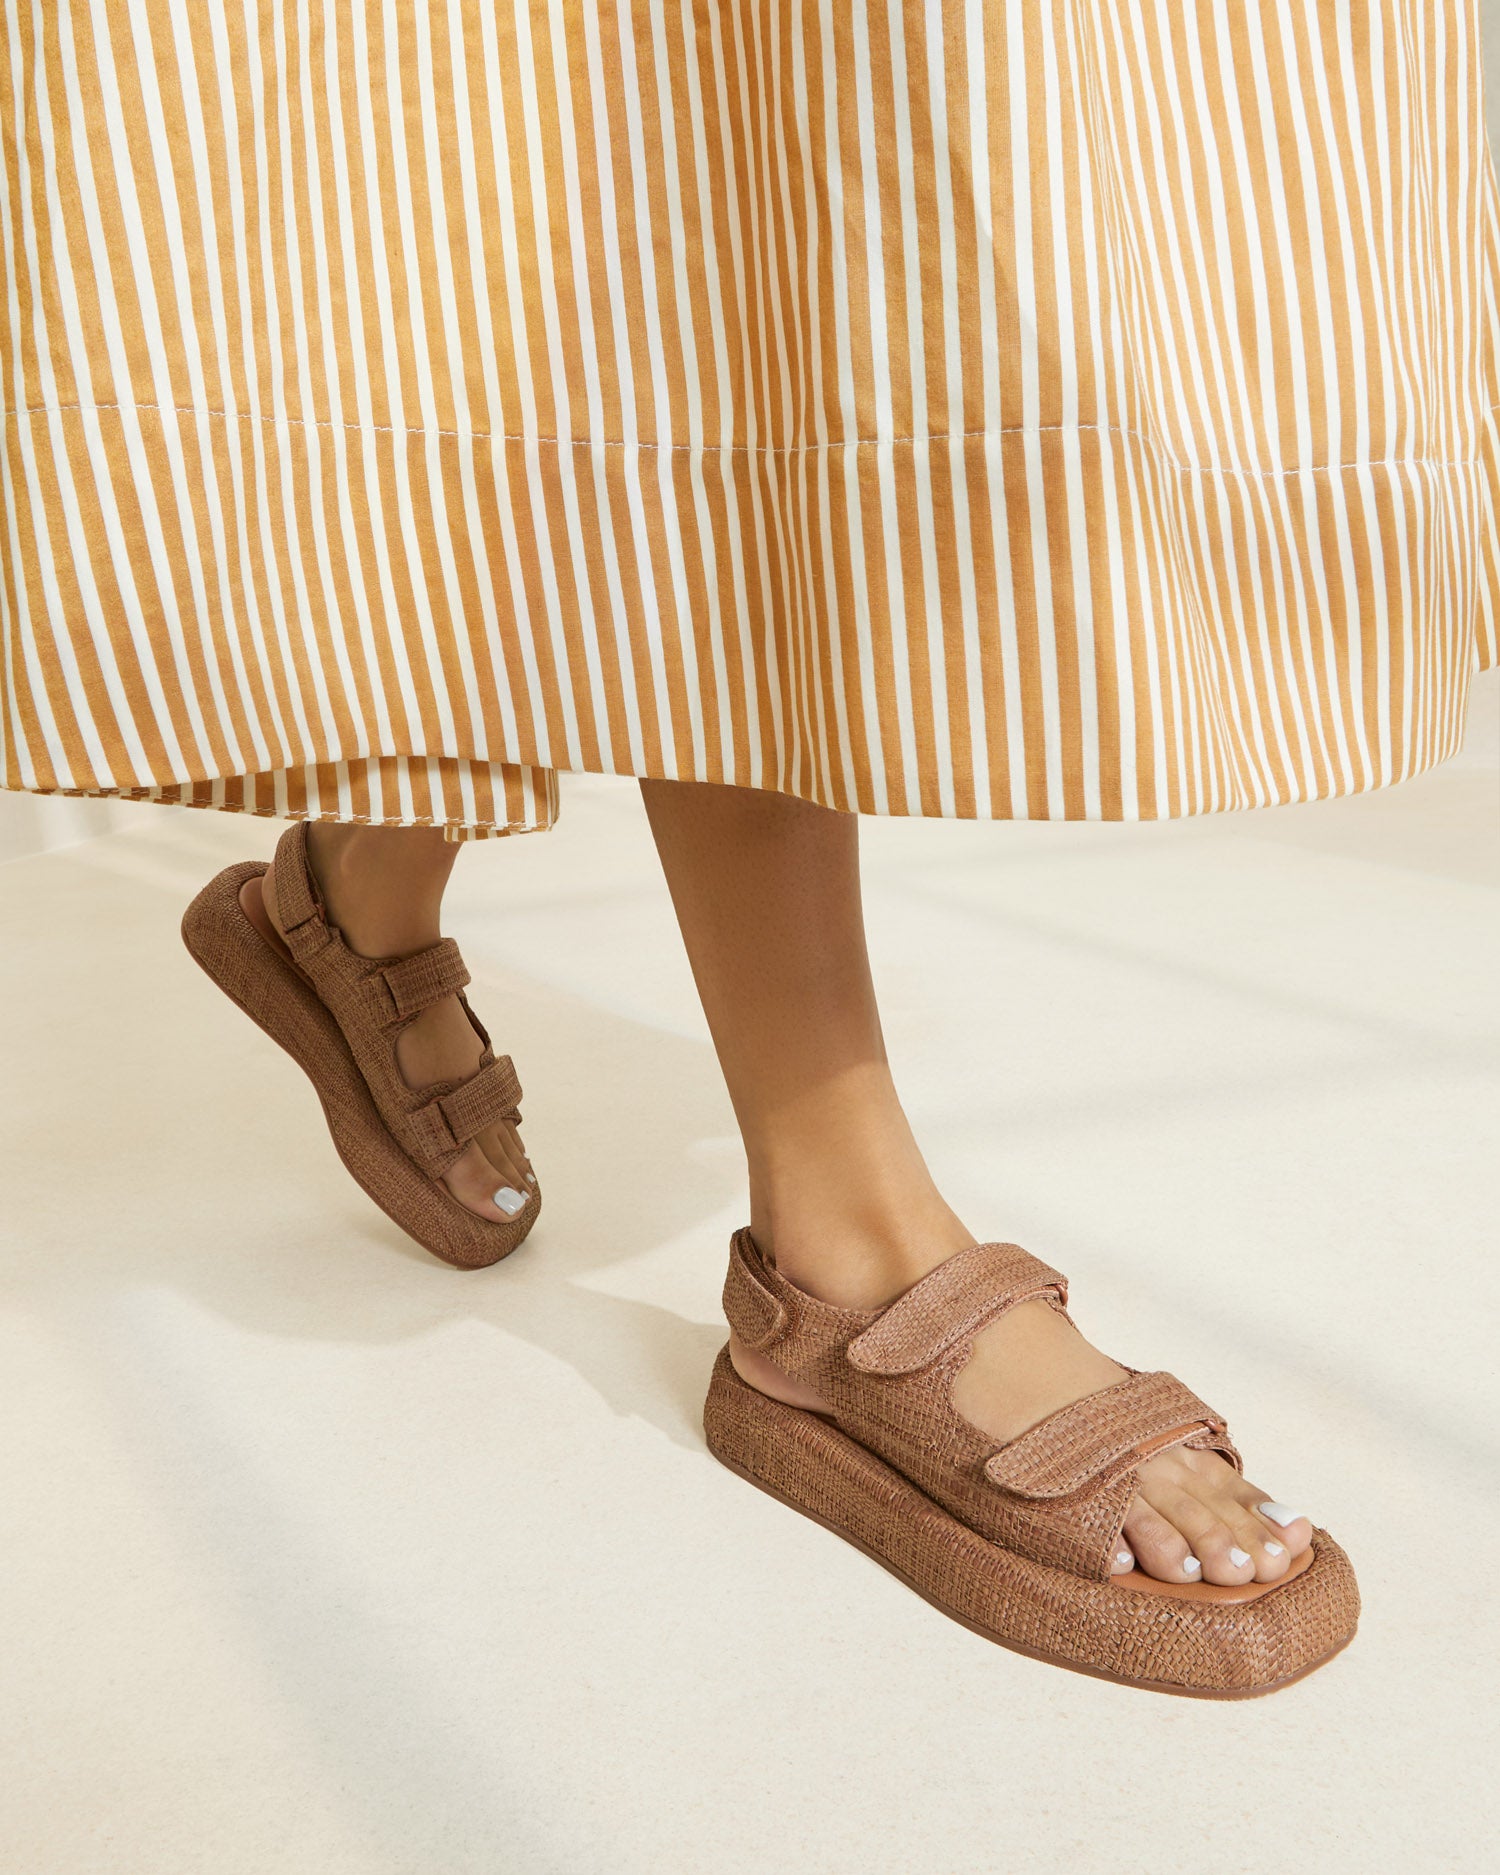 Blaise Platform Sandal, Brown – Only on The Avenue